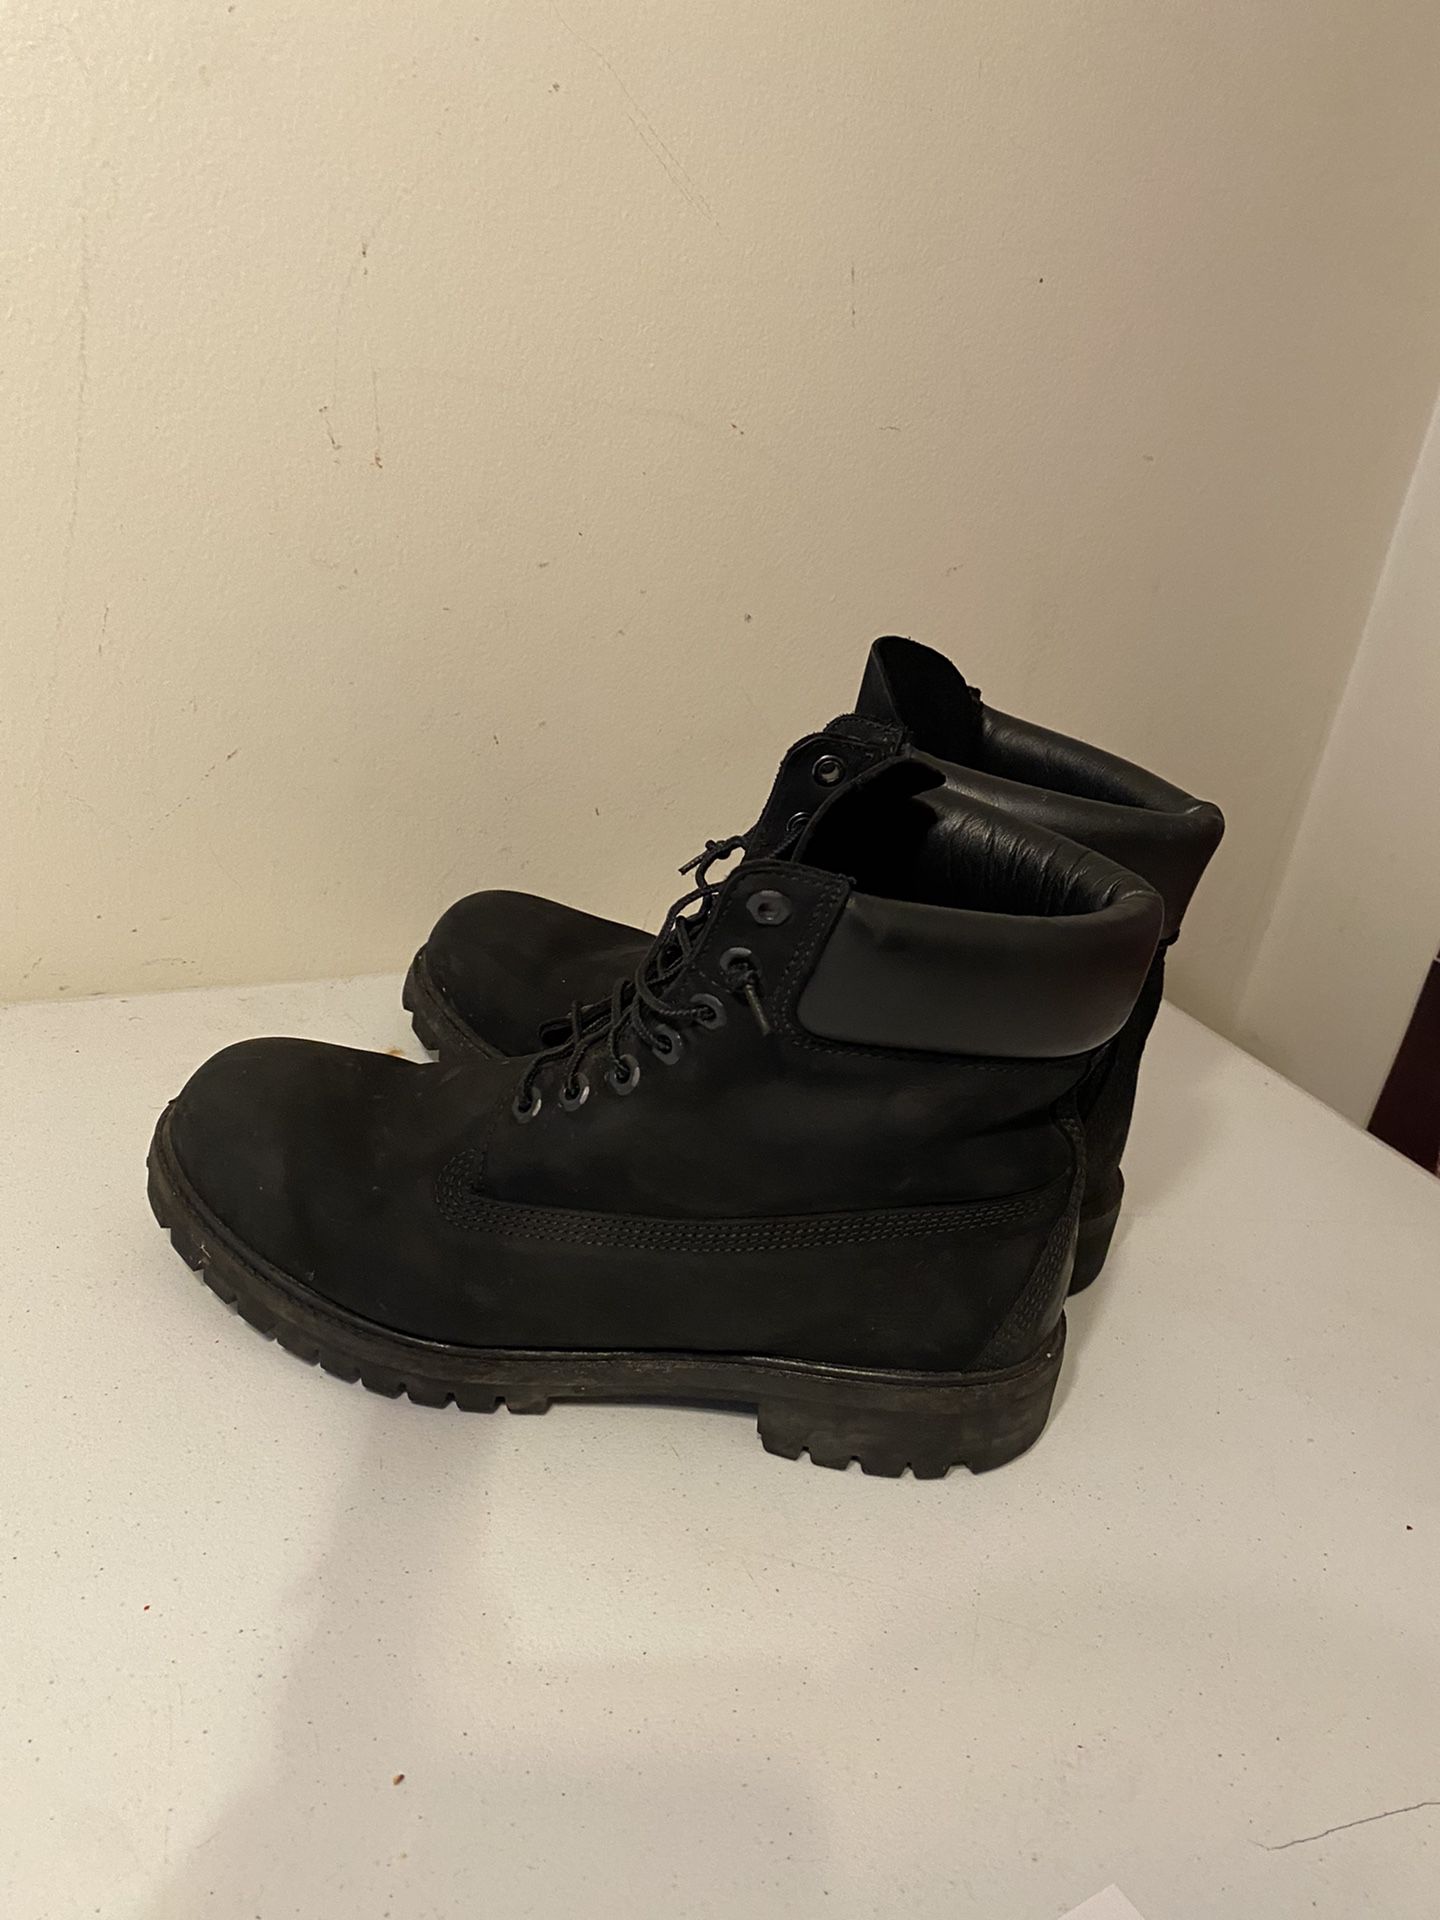 Timberland Men’s Black Boots Sz 10 Gently Used 